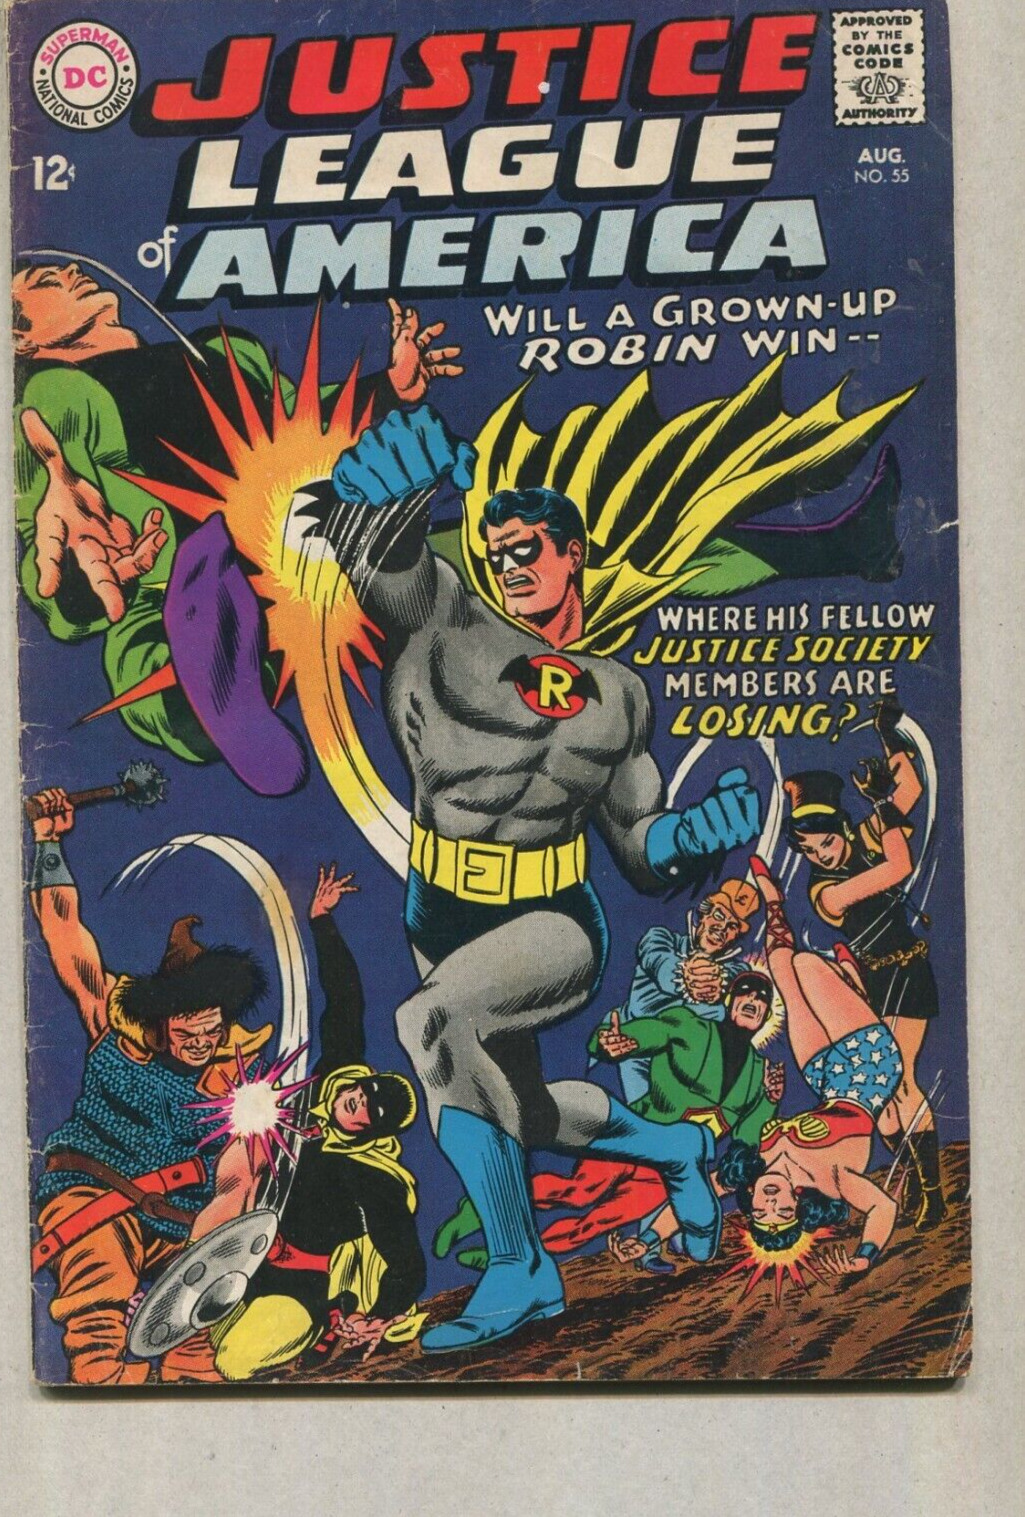 Justice League Of America #55 VG/FN 1967 Will A Grown Up Robin Win  DC Comics SA